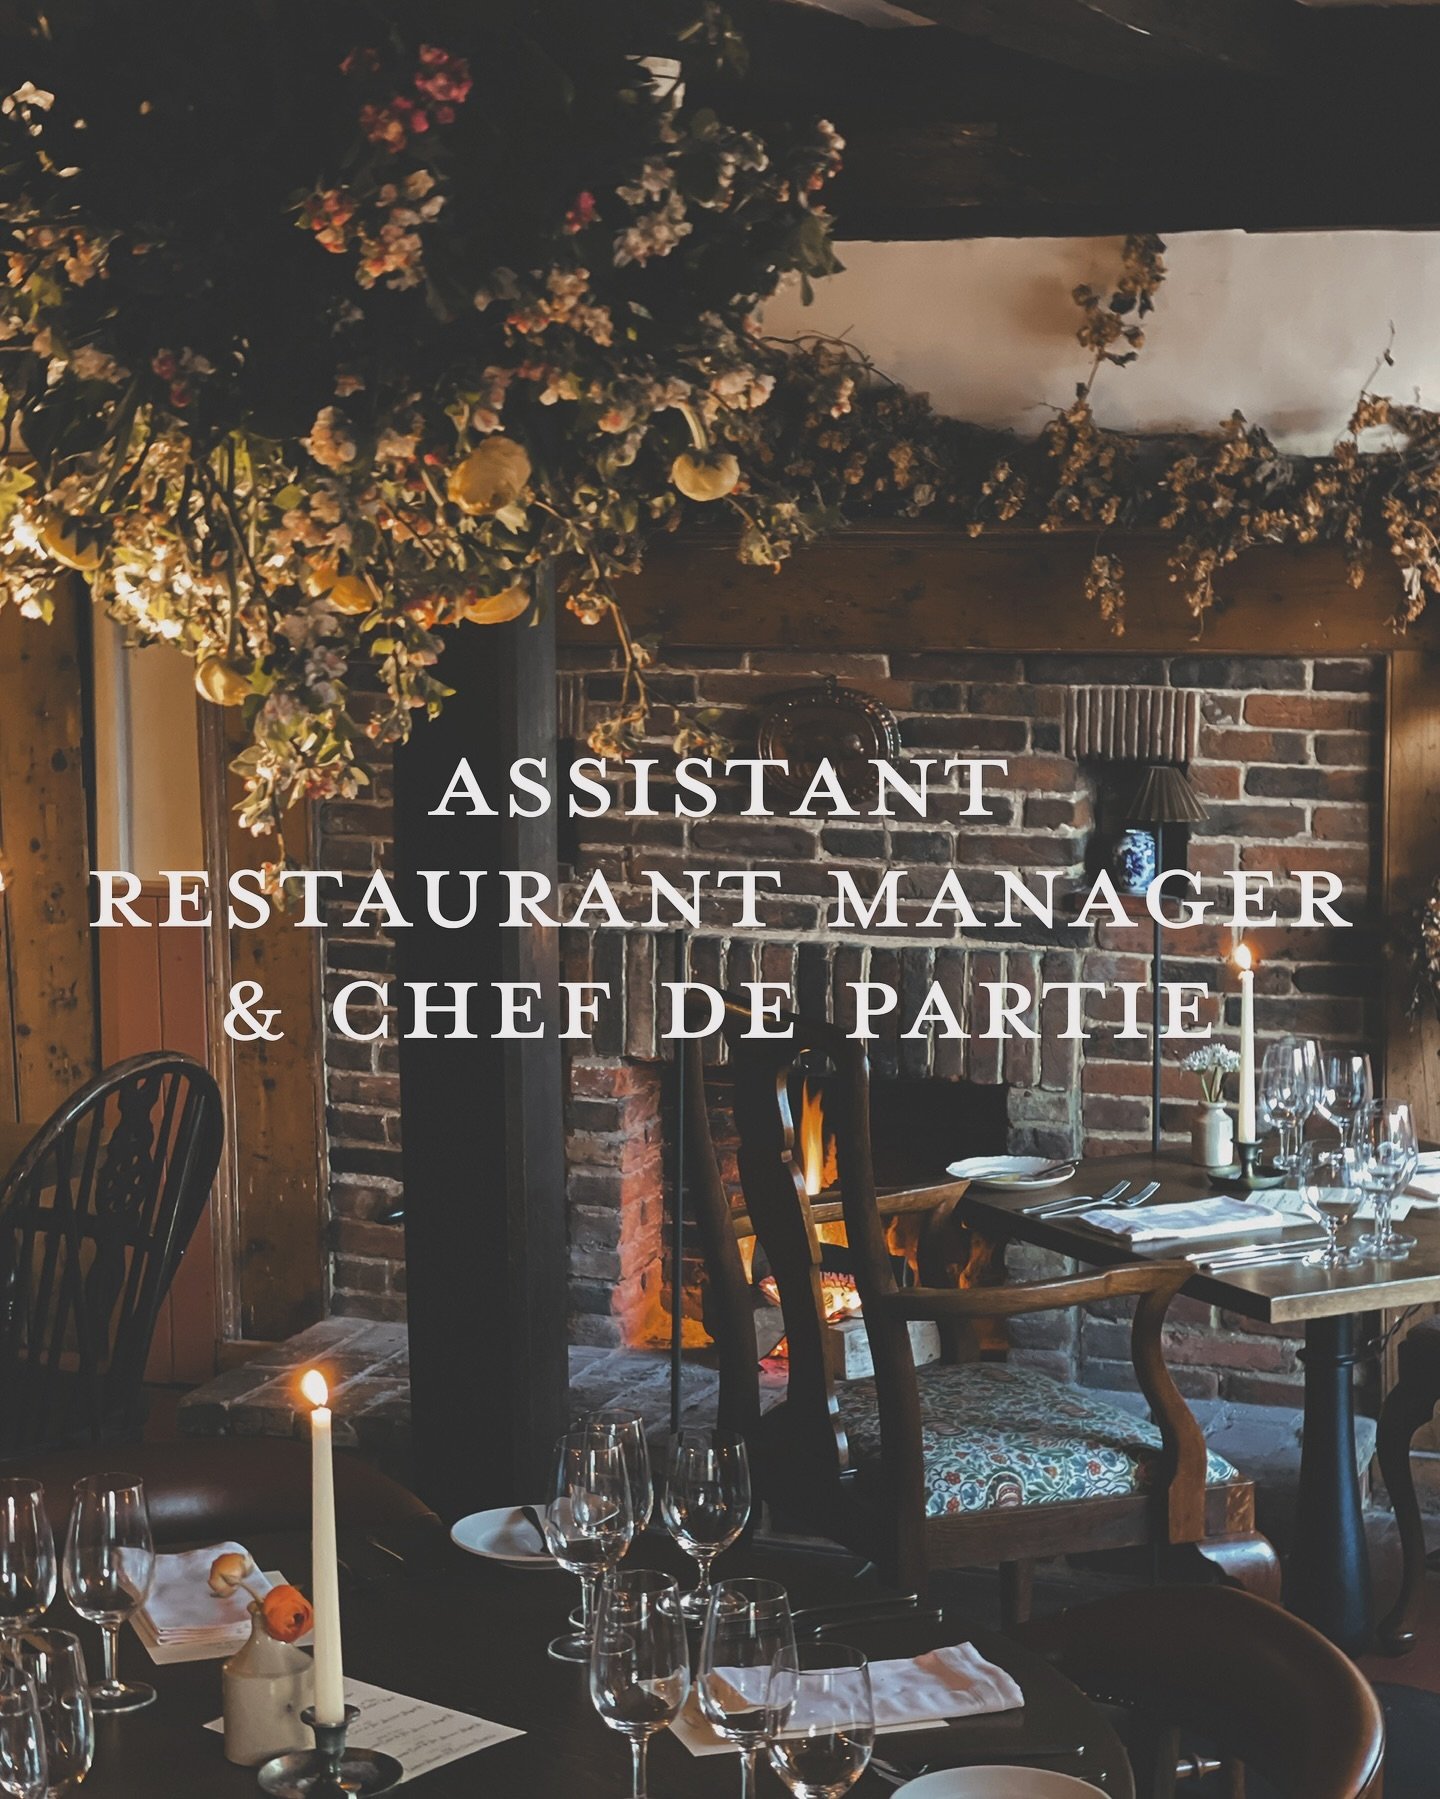 Would you like to join our team cooking dishes from a seasonal menu changing weekly? Or serve our guests thoughtful wines and proper pints in our cosy country pub?

We&rsquo;re growing our team at the Greyhound and are looking for:

🥂 Assistant Gene